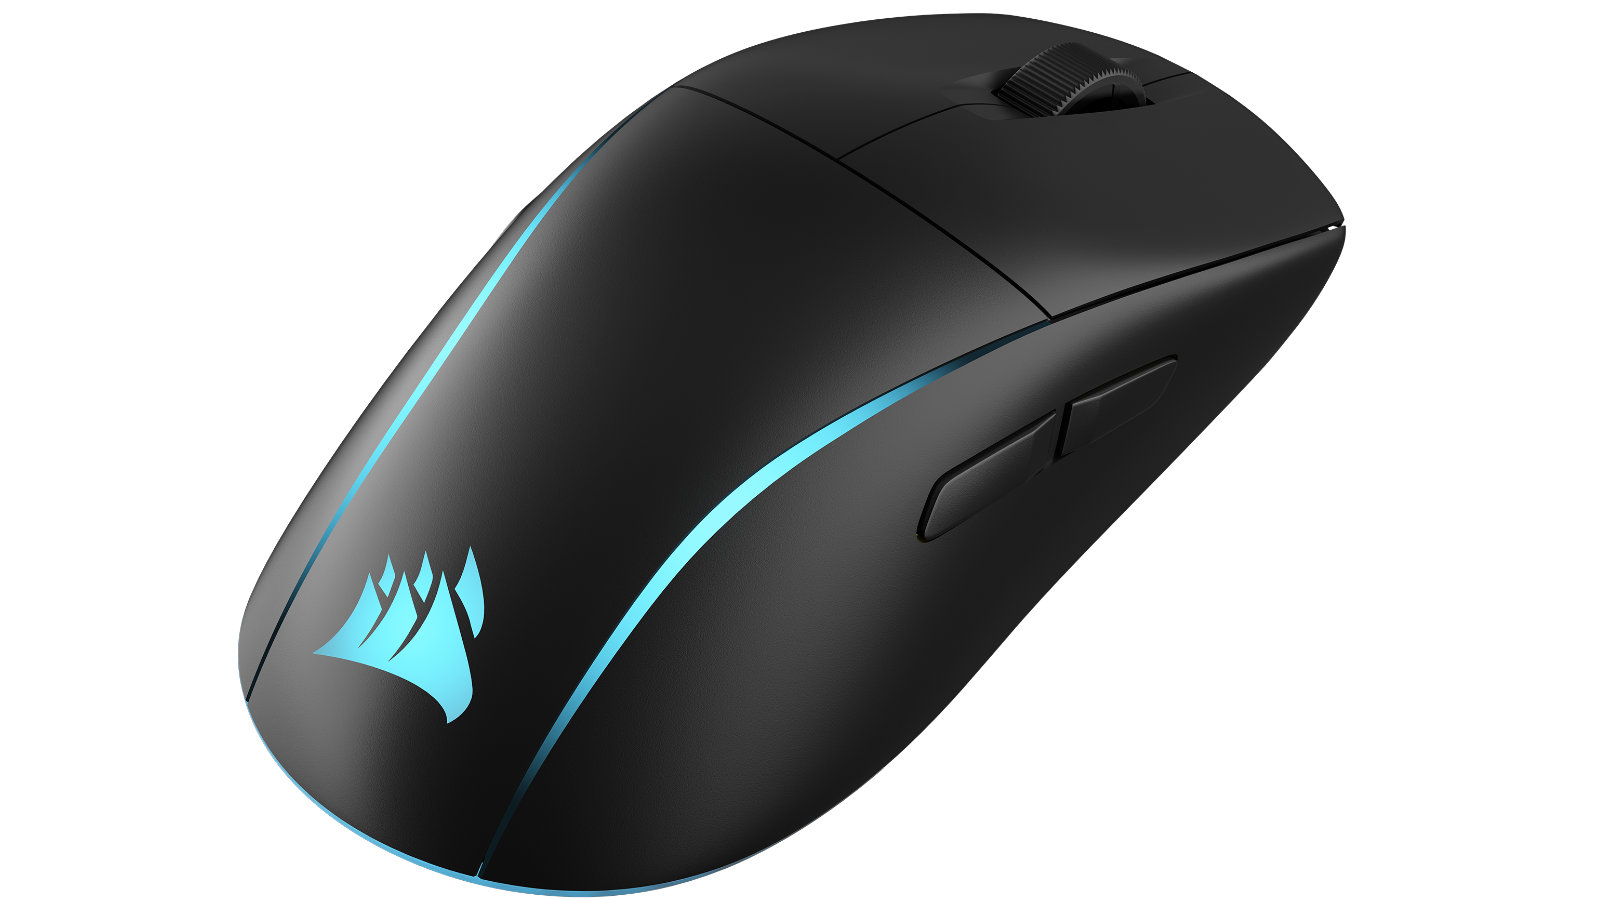 Corsair M75 Wireless gaming mouse product photo against a white background with a blue logo.